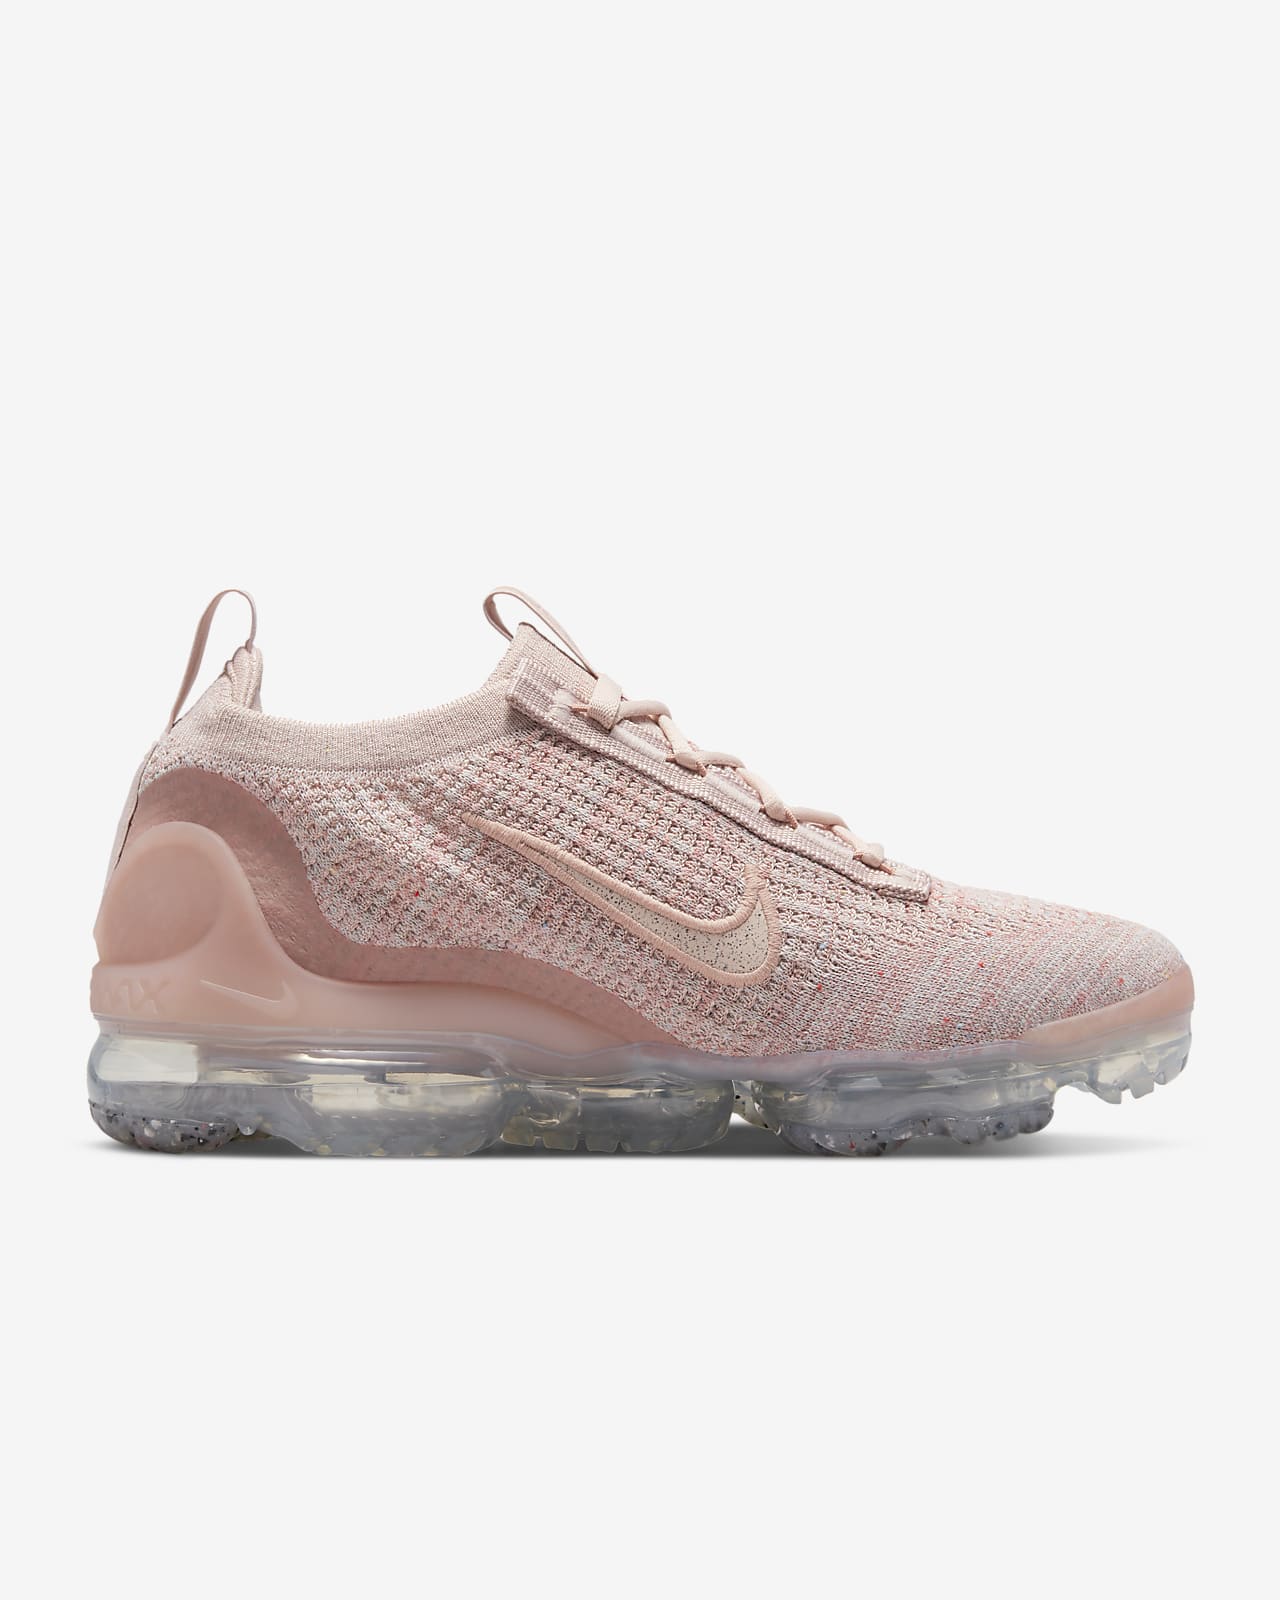 vapormax size up or down